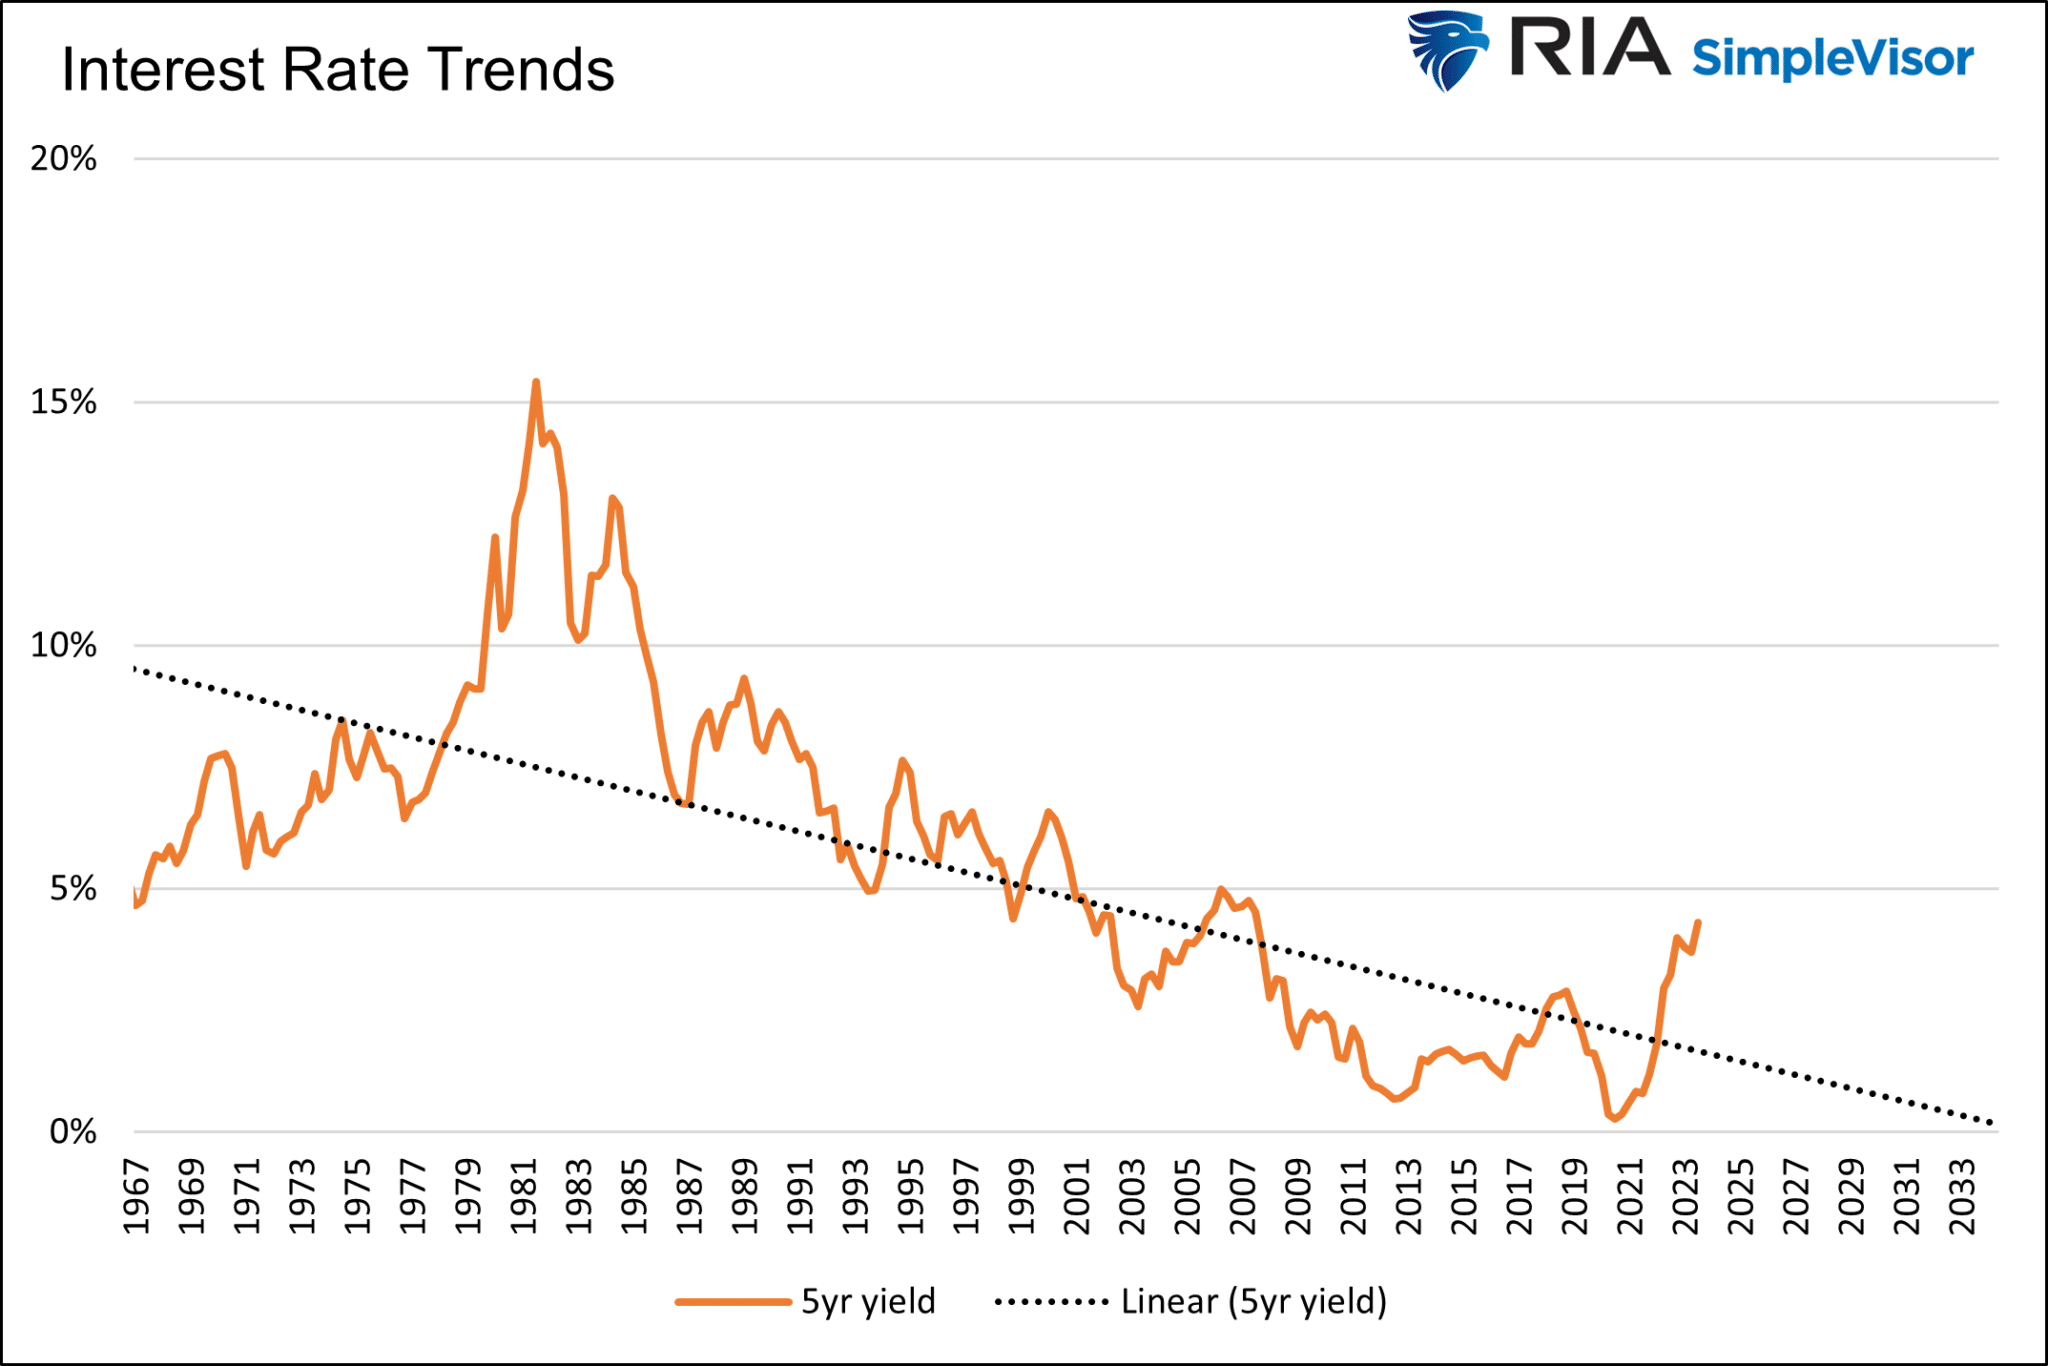 Interest Rate Trends